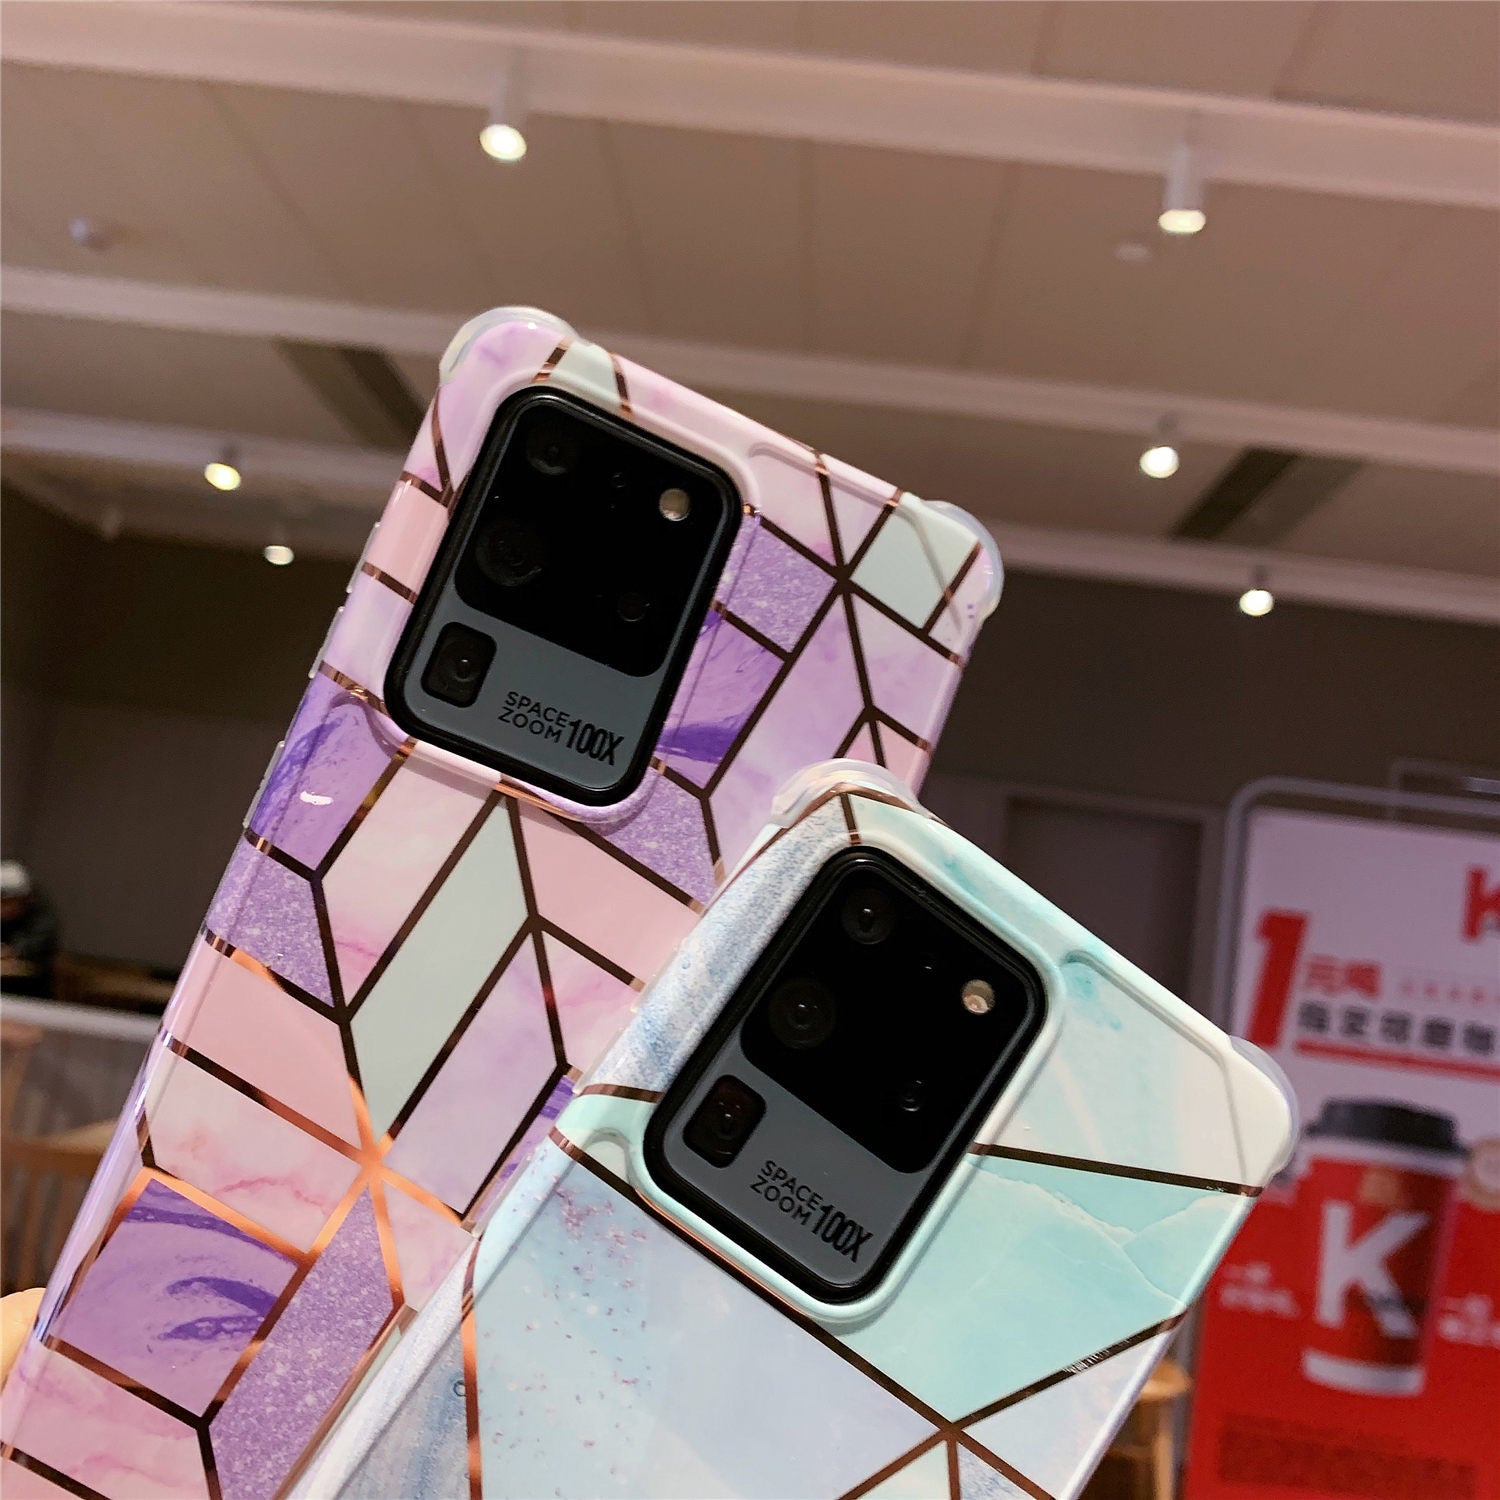 Samsung Galaxy S10/S10 Plus/A10/A20/A50/A50S/A30/Note 10/Note 10 Plus/S20/S20 Plus/S20 FE/S20 Ultra/A51/A71/Note 20/Note 20 Ultra - Marble Plating Geometric Case Soft Glossy Silicone Cover Ultra Slim Shell - 380230 Find Epic Store